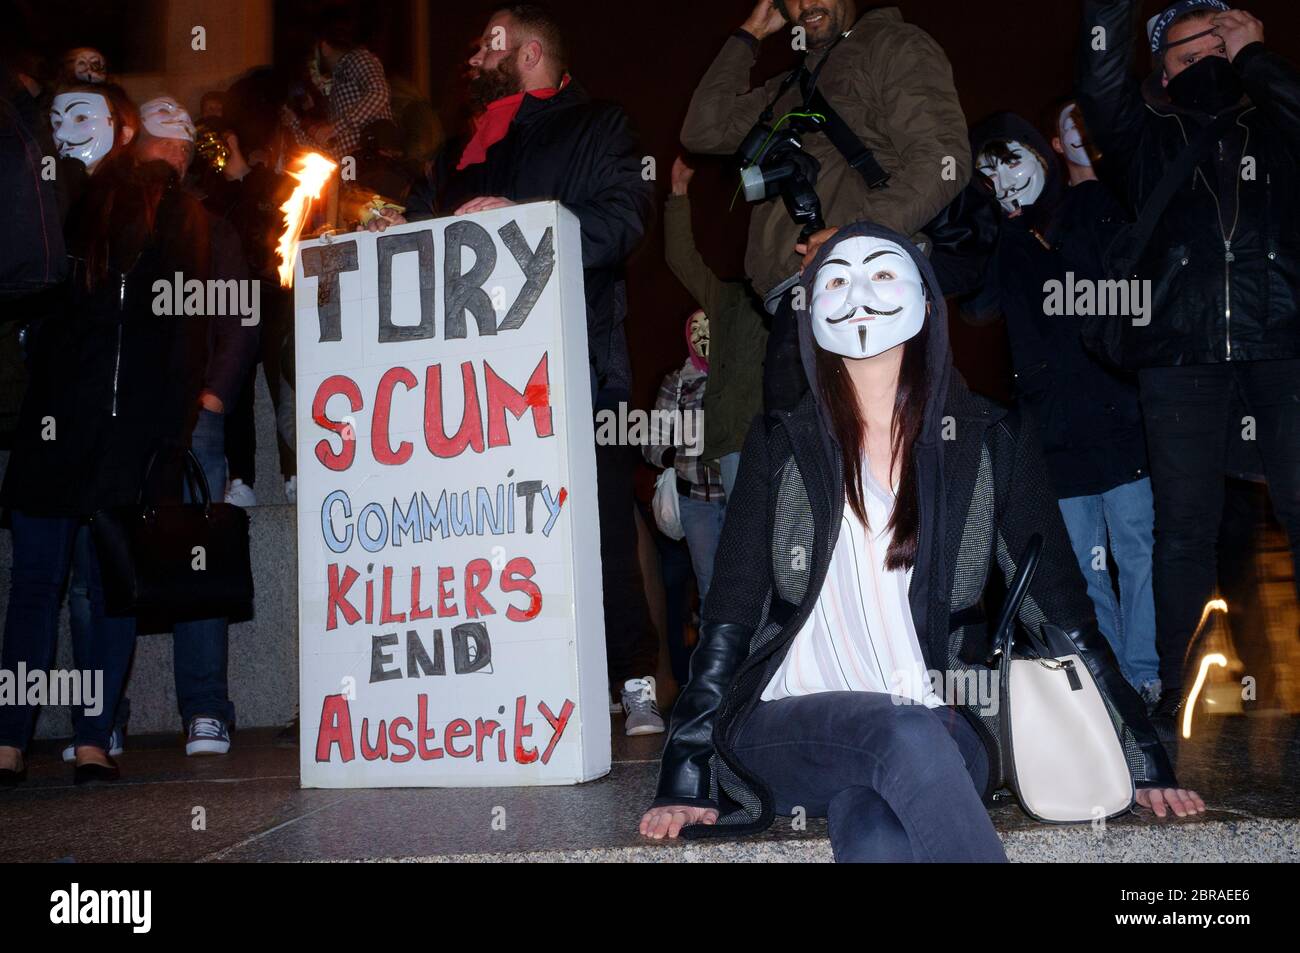 The 'Million Mask March' sees protests wearing V for Vendetta-style Guy Fawkes masks and demonstrating against austerity, the infringement of civil ri Stock Photo